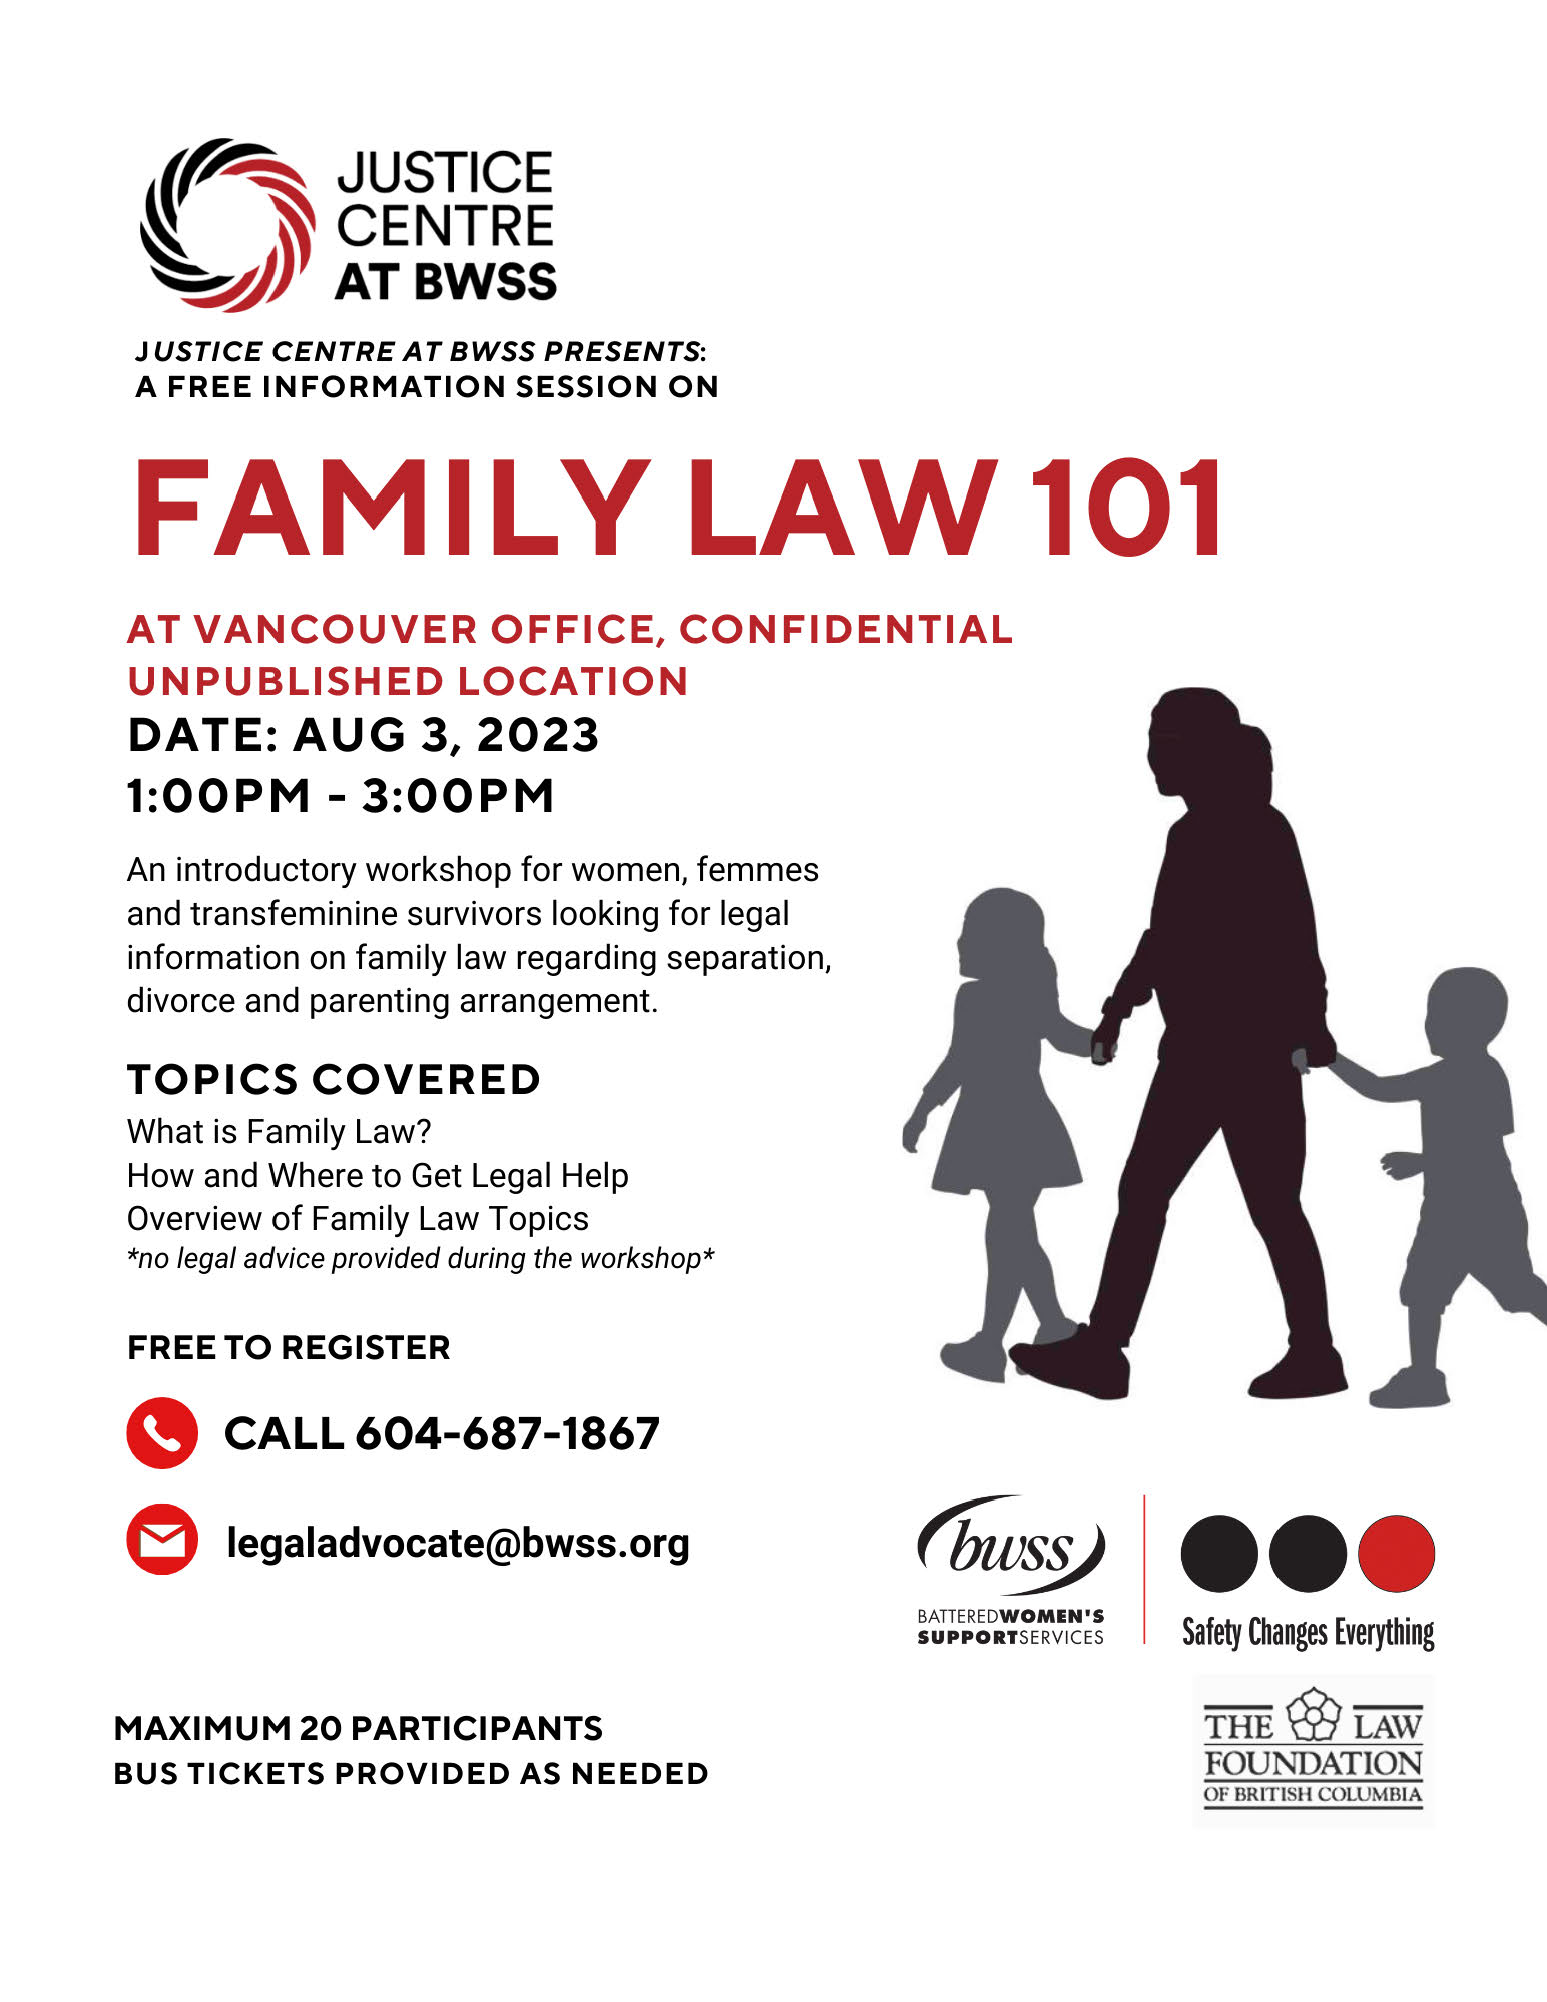 FAMILY LAW 101 August 2023